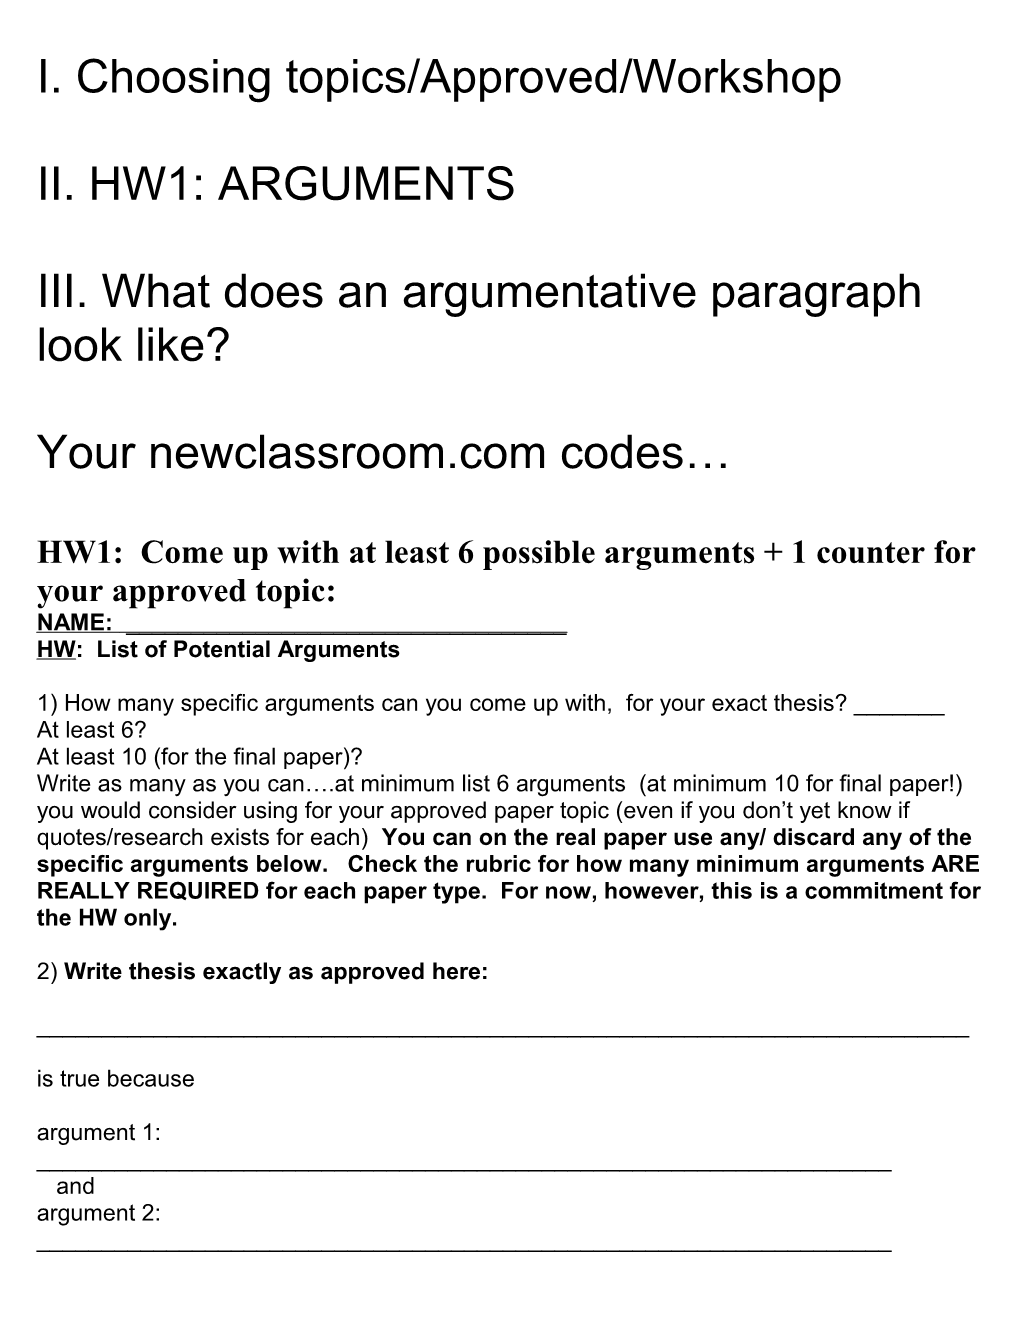 III. What Does an Argumentative Paragraph Look Like?